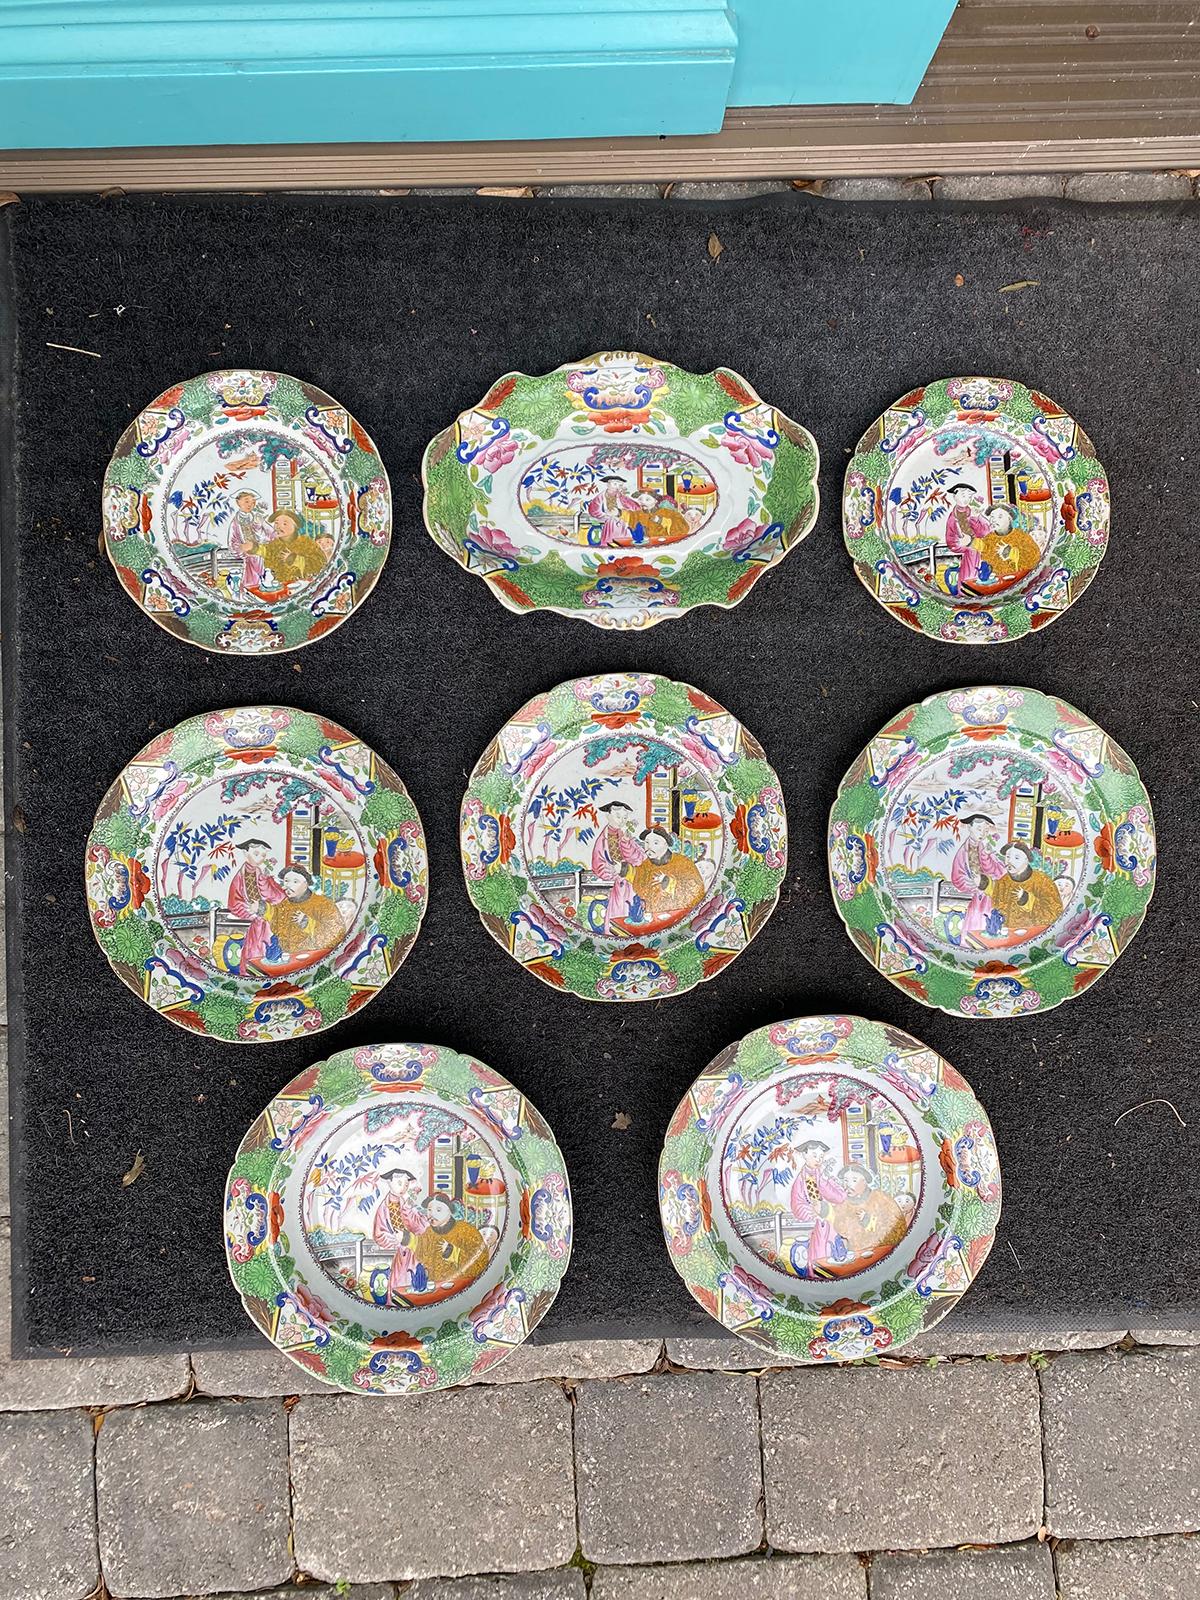 Set of Eight Early 19th Century Circa 1800 English Mason's Enameled Ironstone China Plates in Mandarin pattern. All marked. 
Dimensions:
Oval dish with gilt edges:11